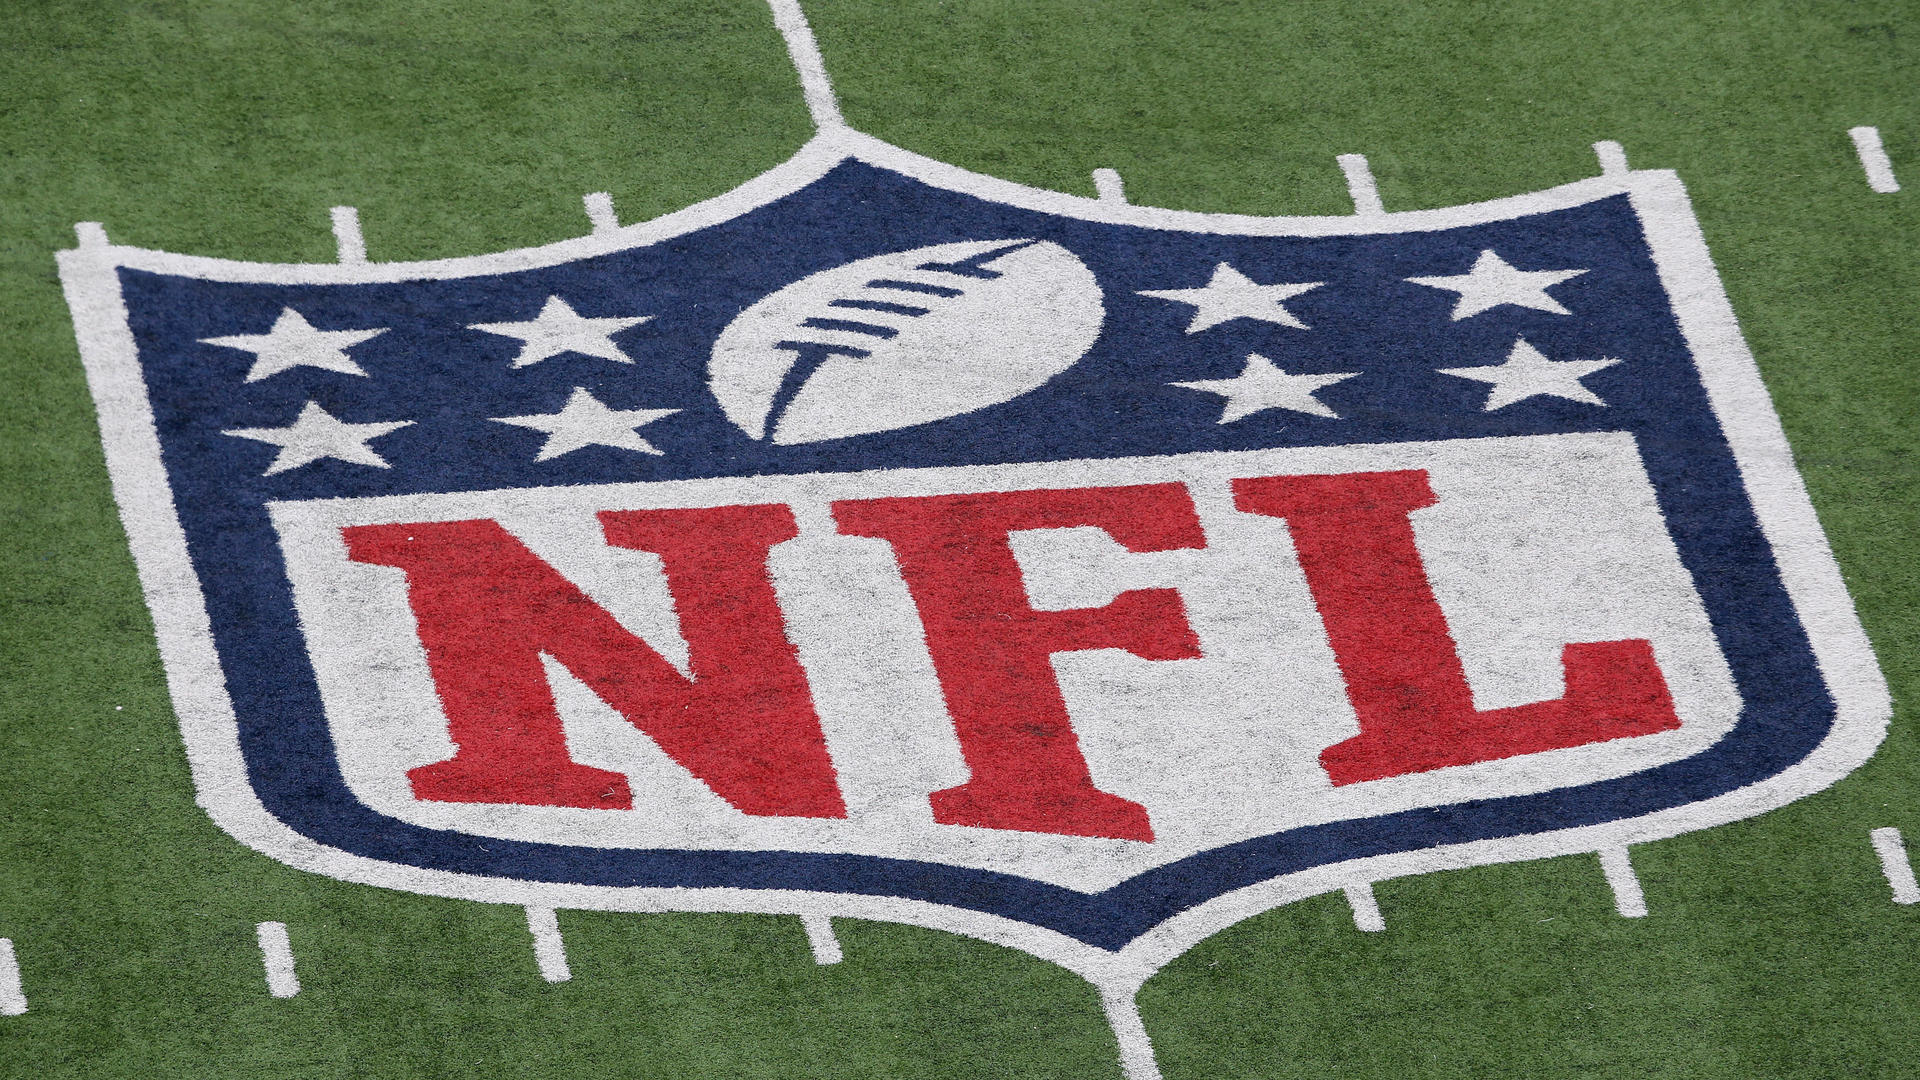 Tramel: Pandemic shows NFL's Tuesday night football works